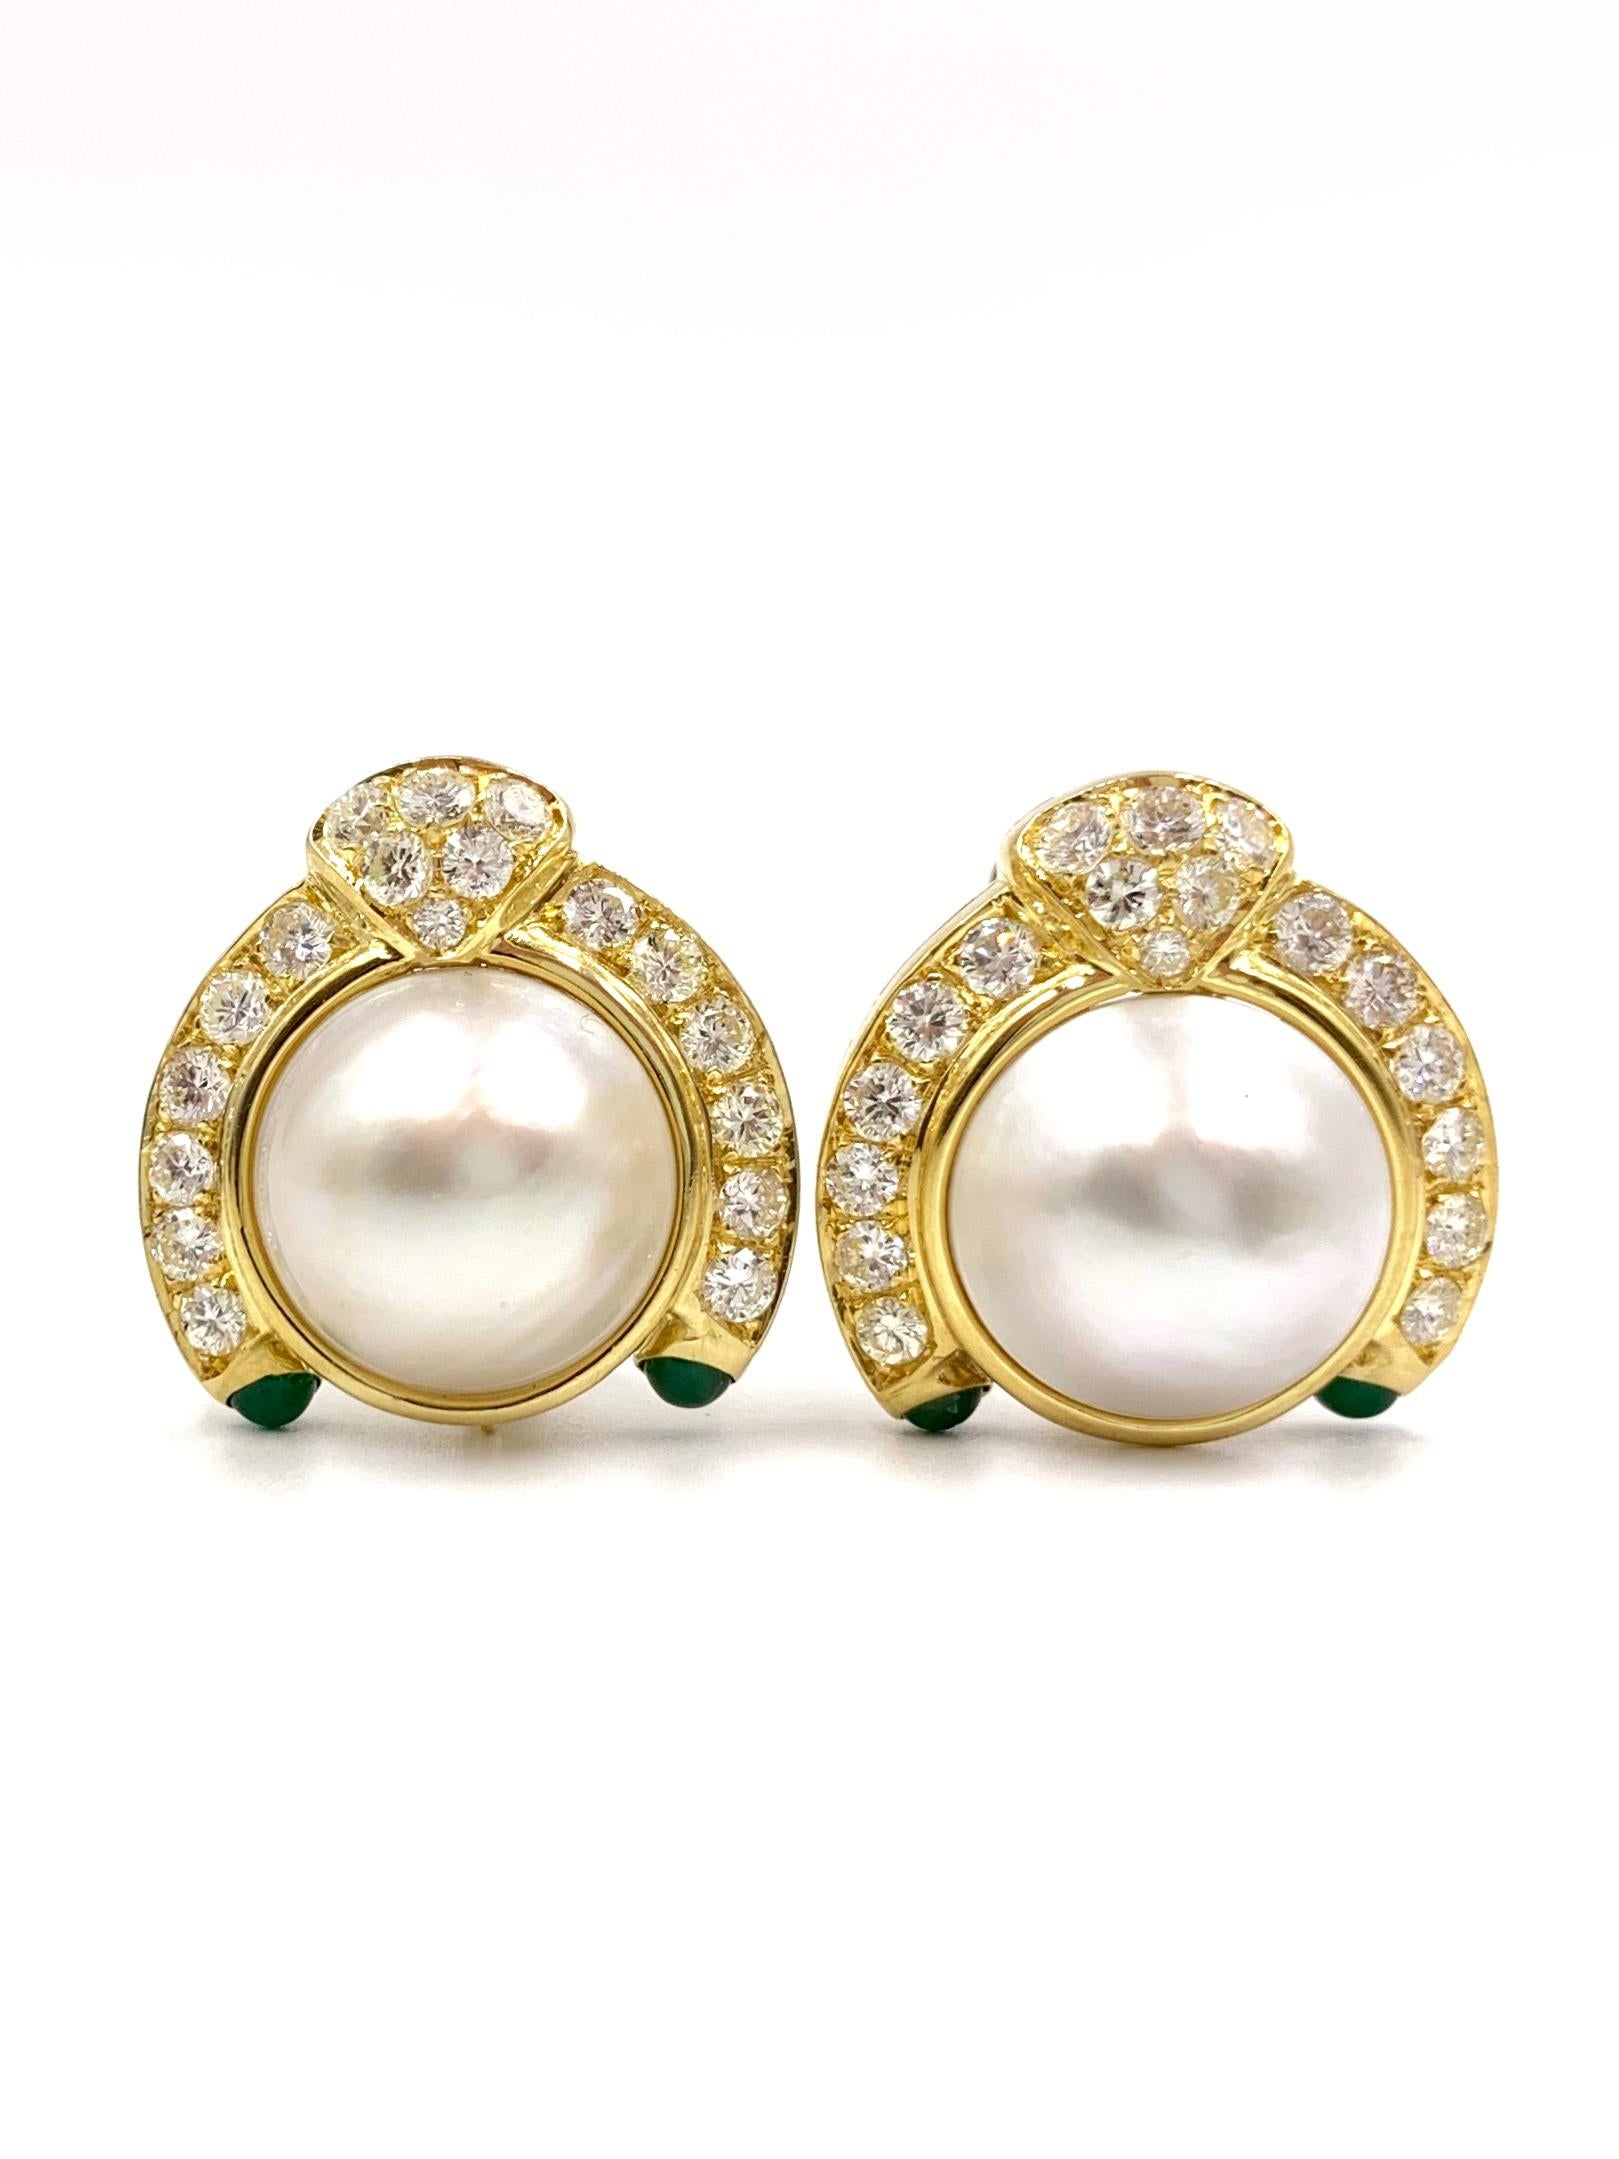 Round Cut Diamond, Mabe Pearl and Emerald 18 Karat Convertible Earrings For Sale